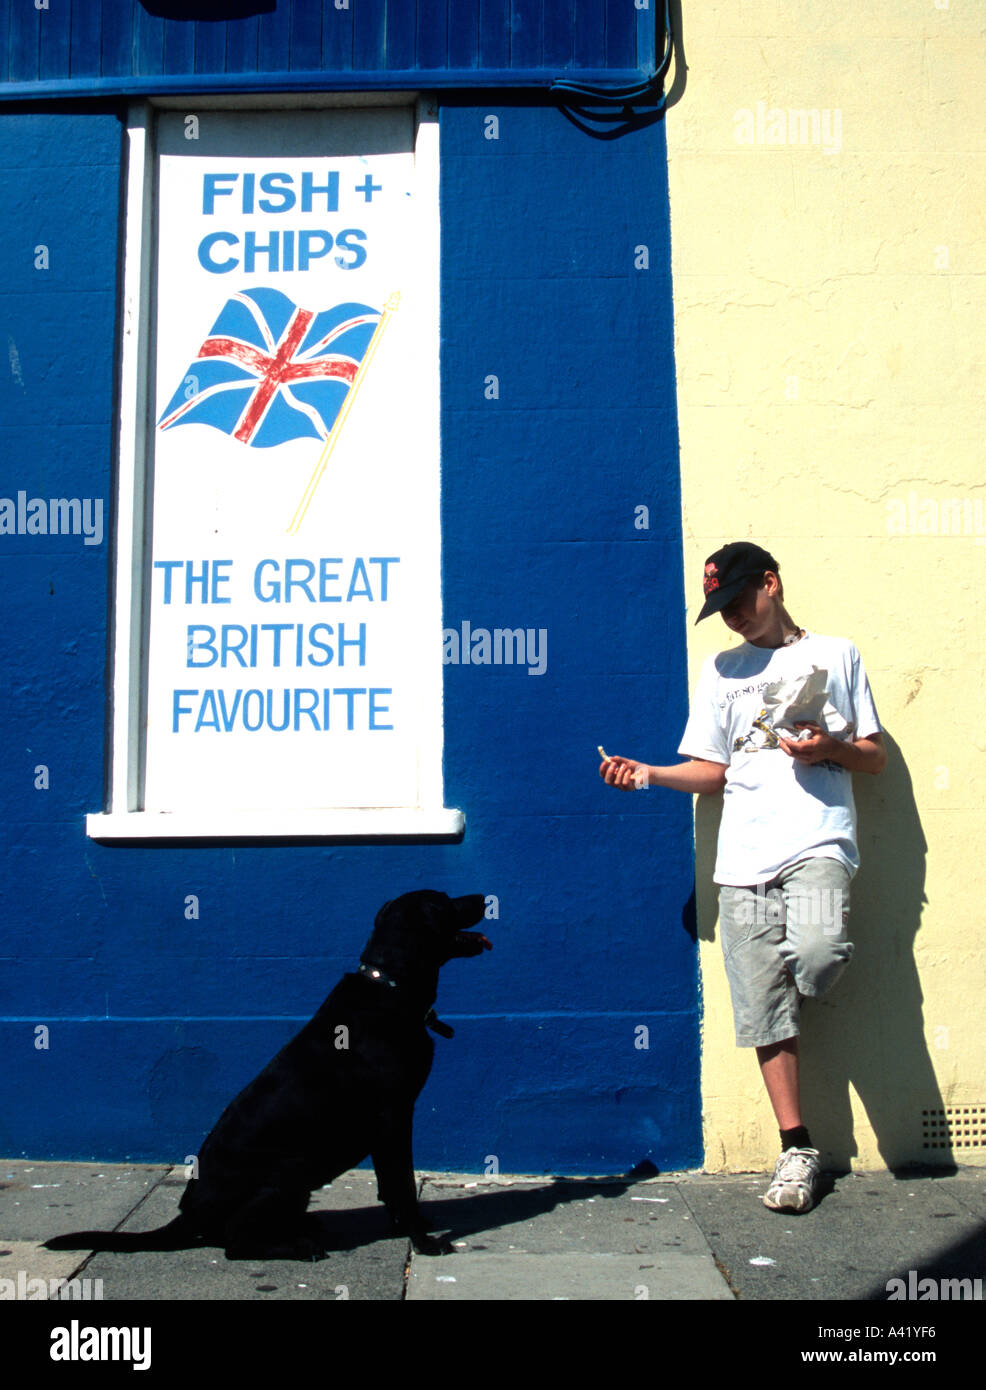 Boy throwing chip for jumping dog Fish Chip shop Fish and Chips Hastings East Sussex England Britain Europe EU Luke Hanna Iggy Stock Photo